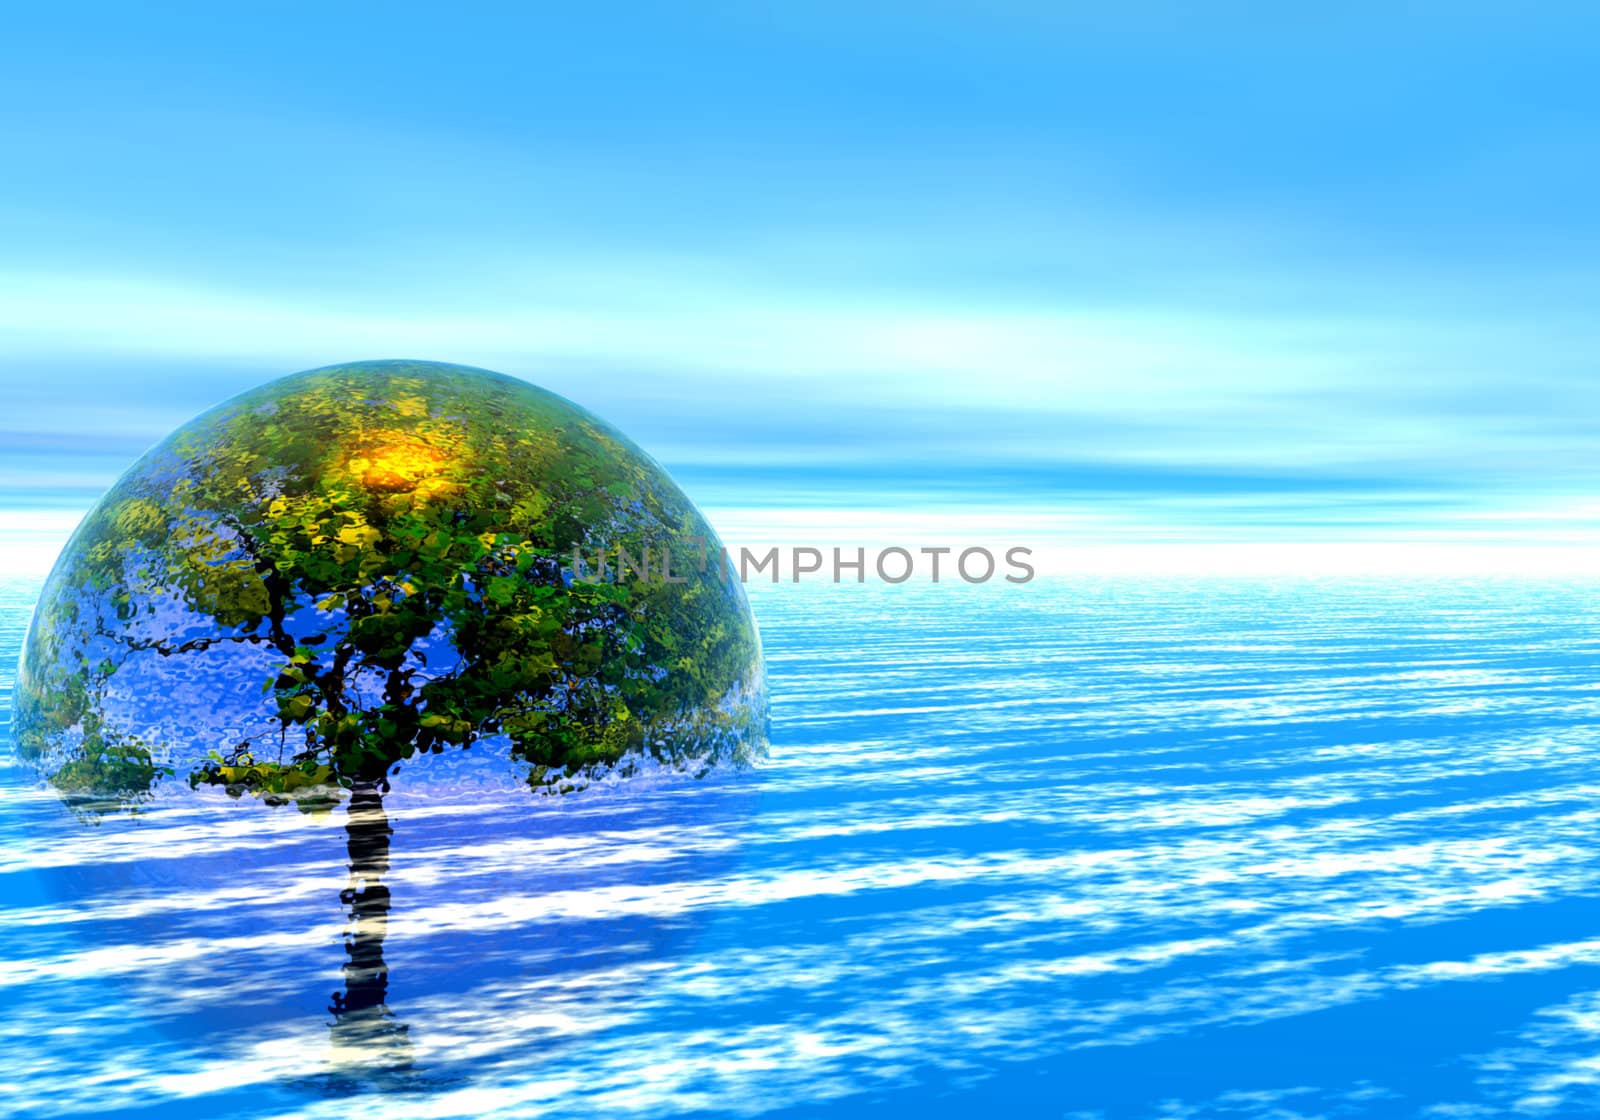 abstract creative symbolic image transparent dome, with the last island life